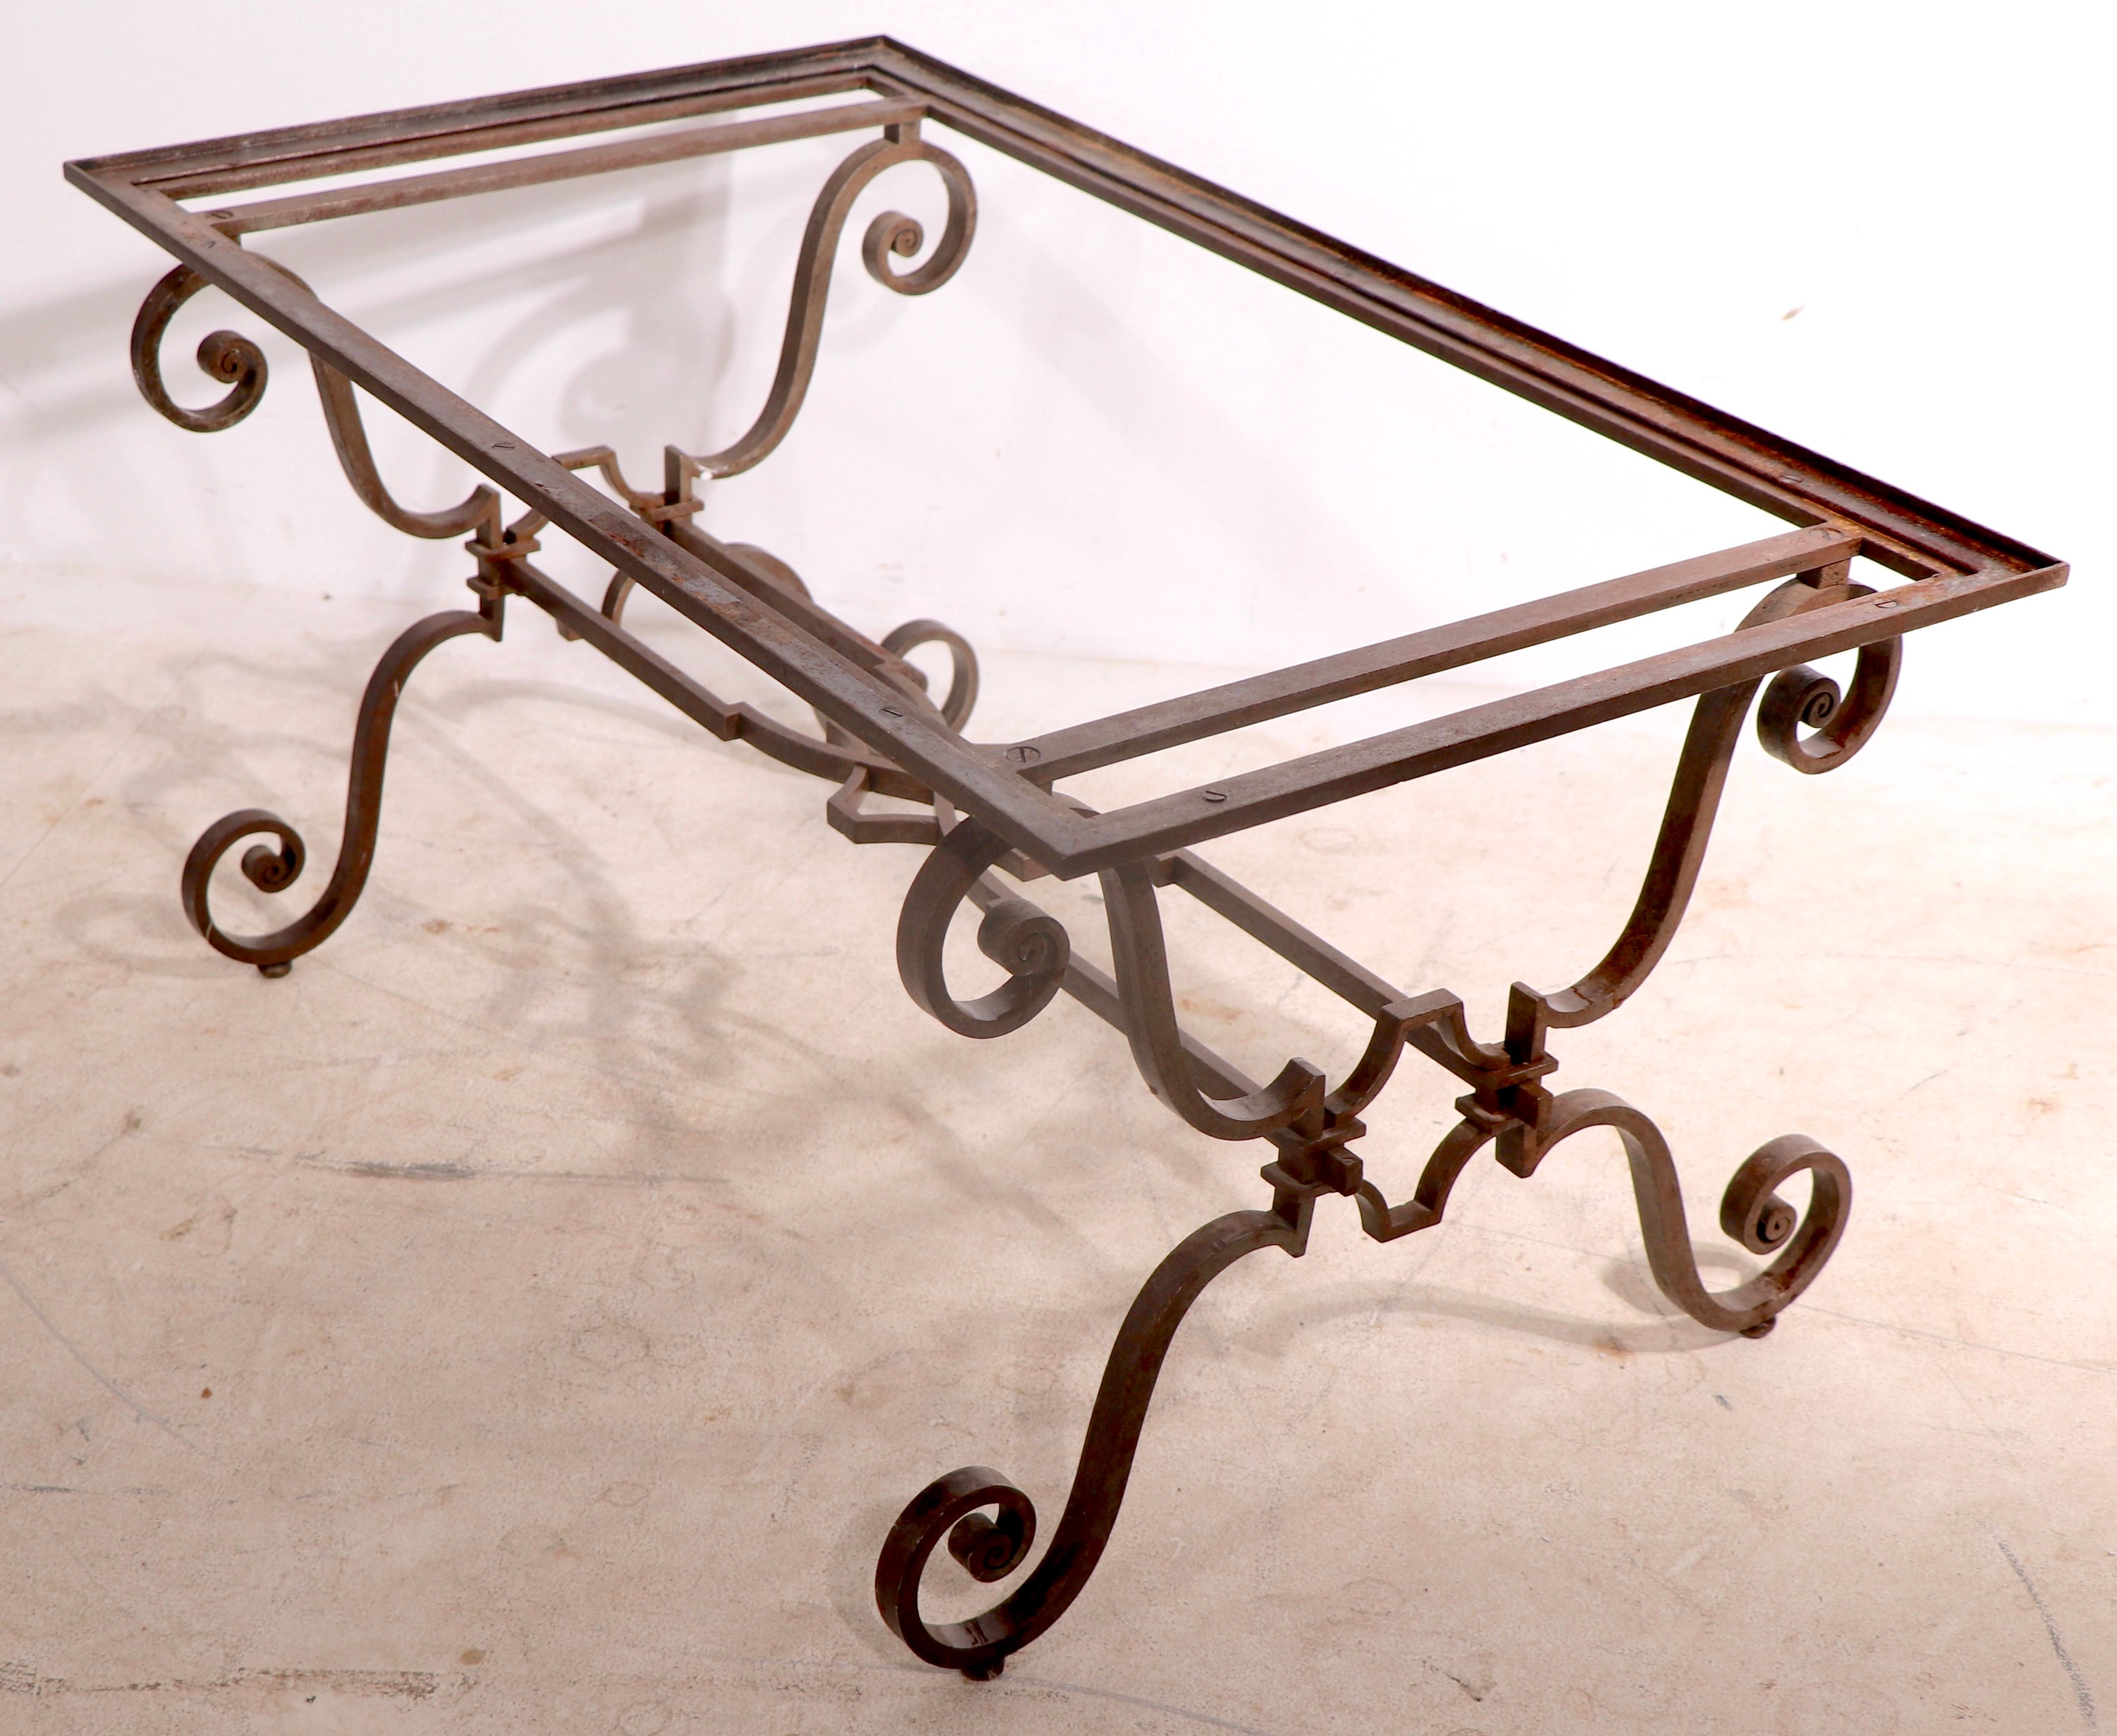 Exquisite Art Deco metal work table base, attributed to Raymond Subes. Heavy gauge metal stock, formed by a master craftsman, this example probably had a marble top, no longer present. The table base is in very good, original, untouched condition,